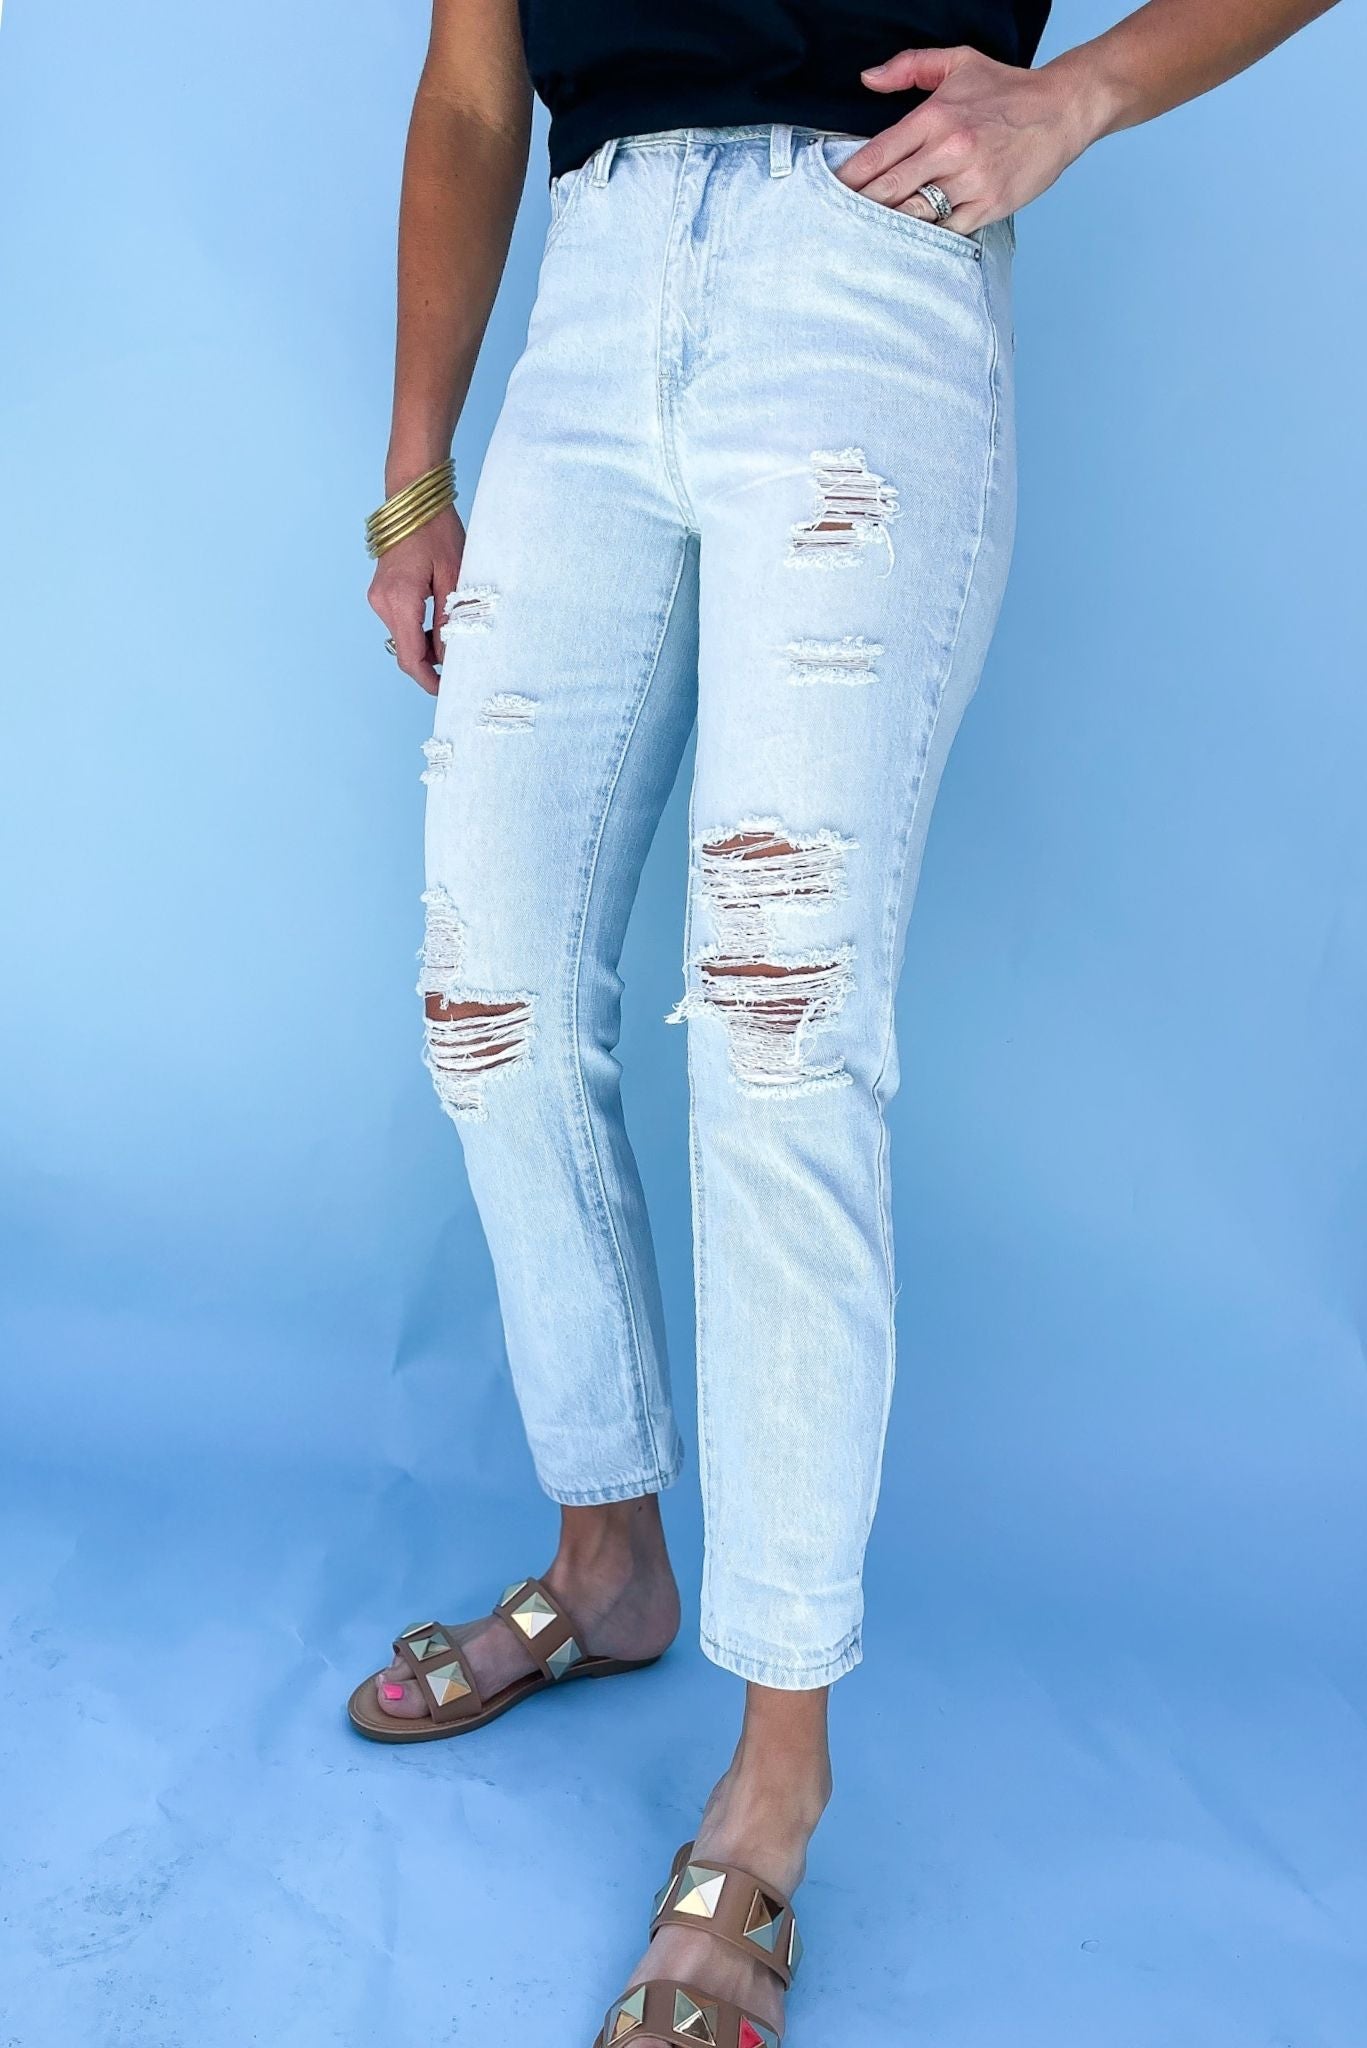 Light Wash High Rise Distressed Mom Jeans, distressed jeans, mom jeans, cuffed, light wash, denim jeans, mom jeans, summer jeans, shop style your senses by mallory fitzsimmons